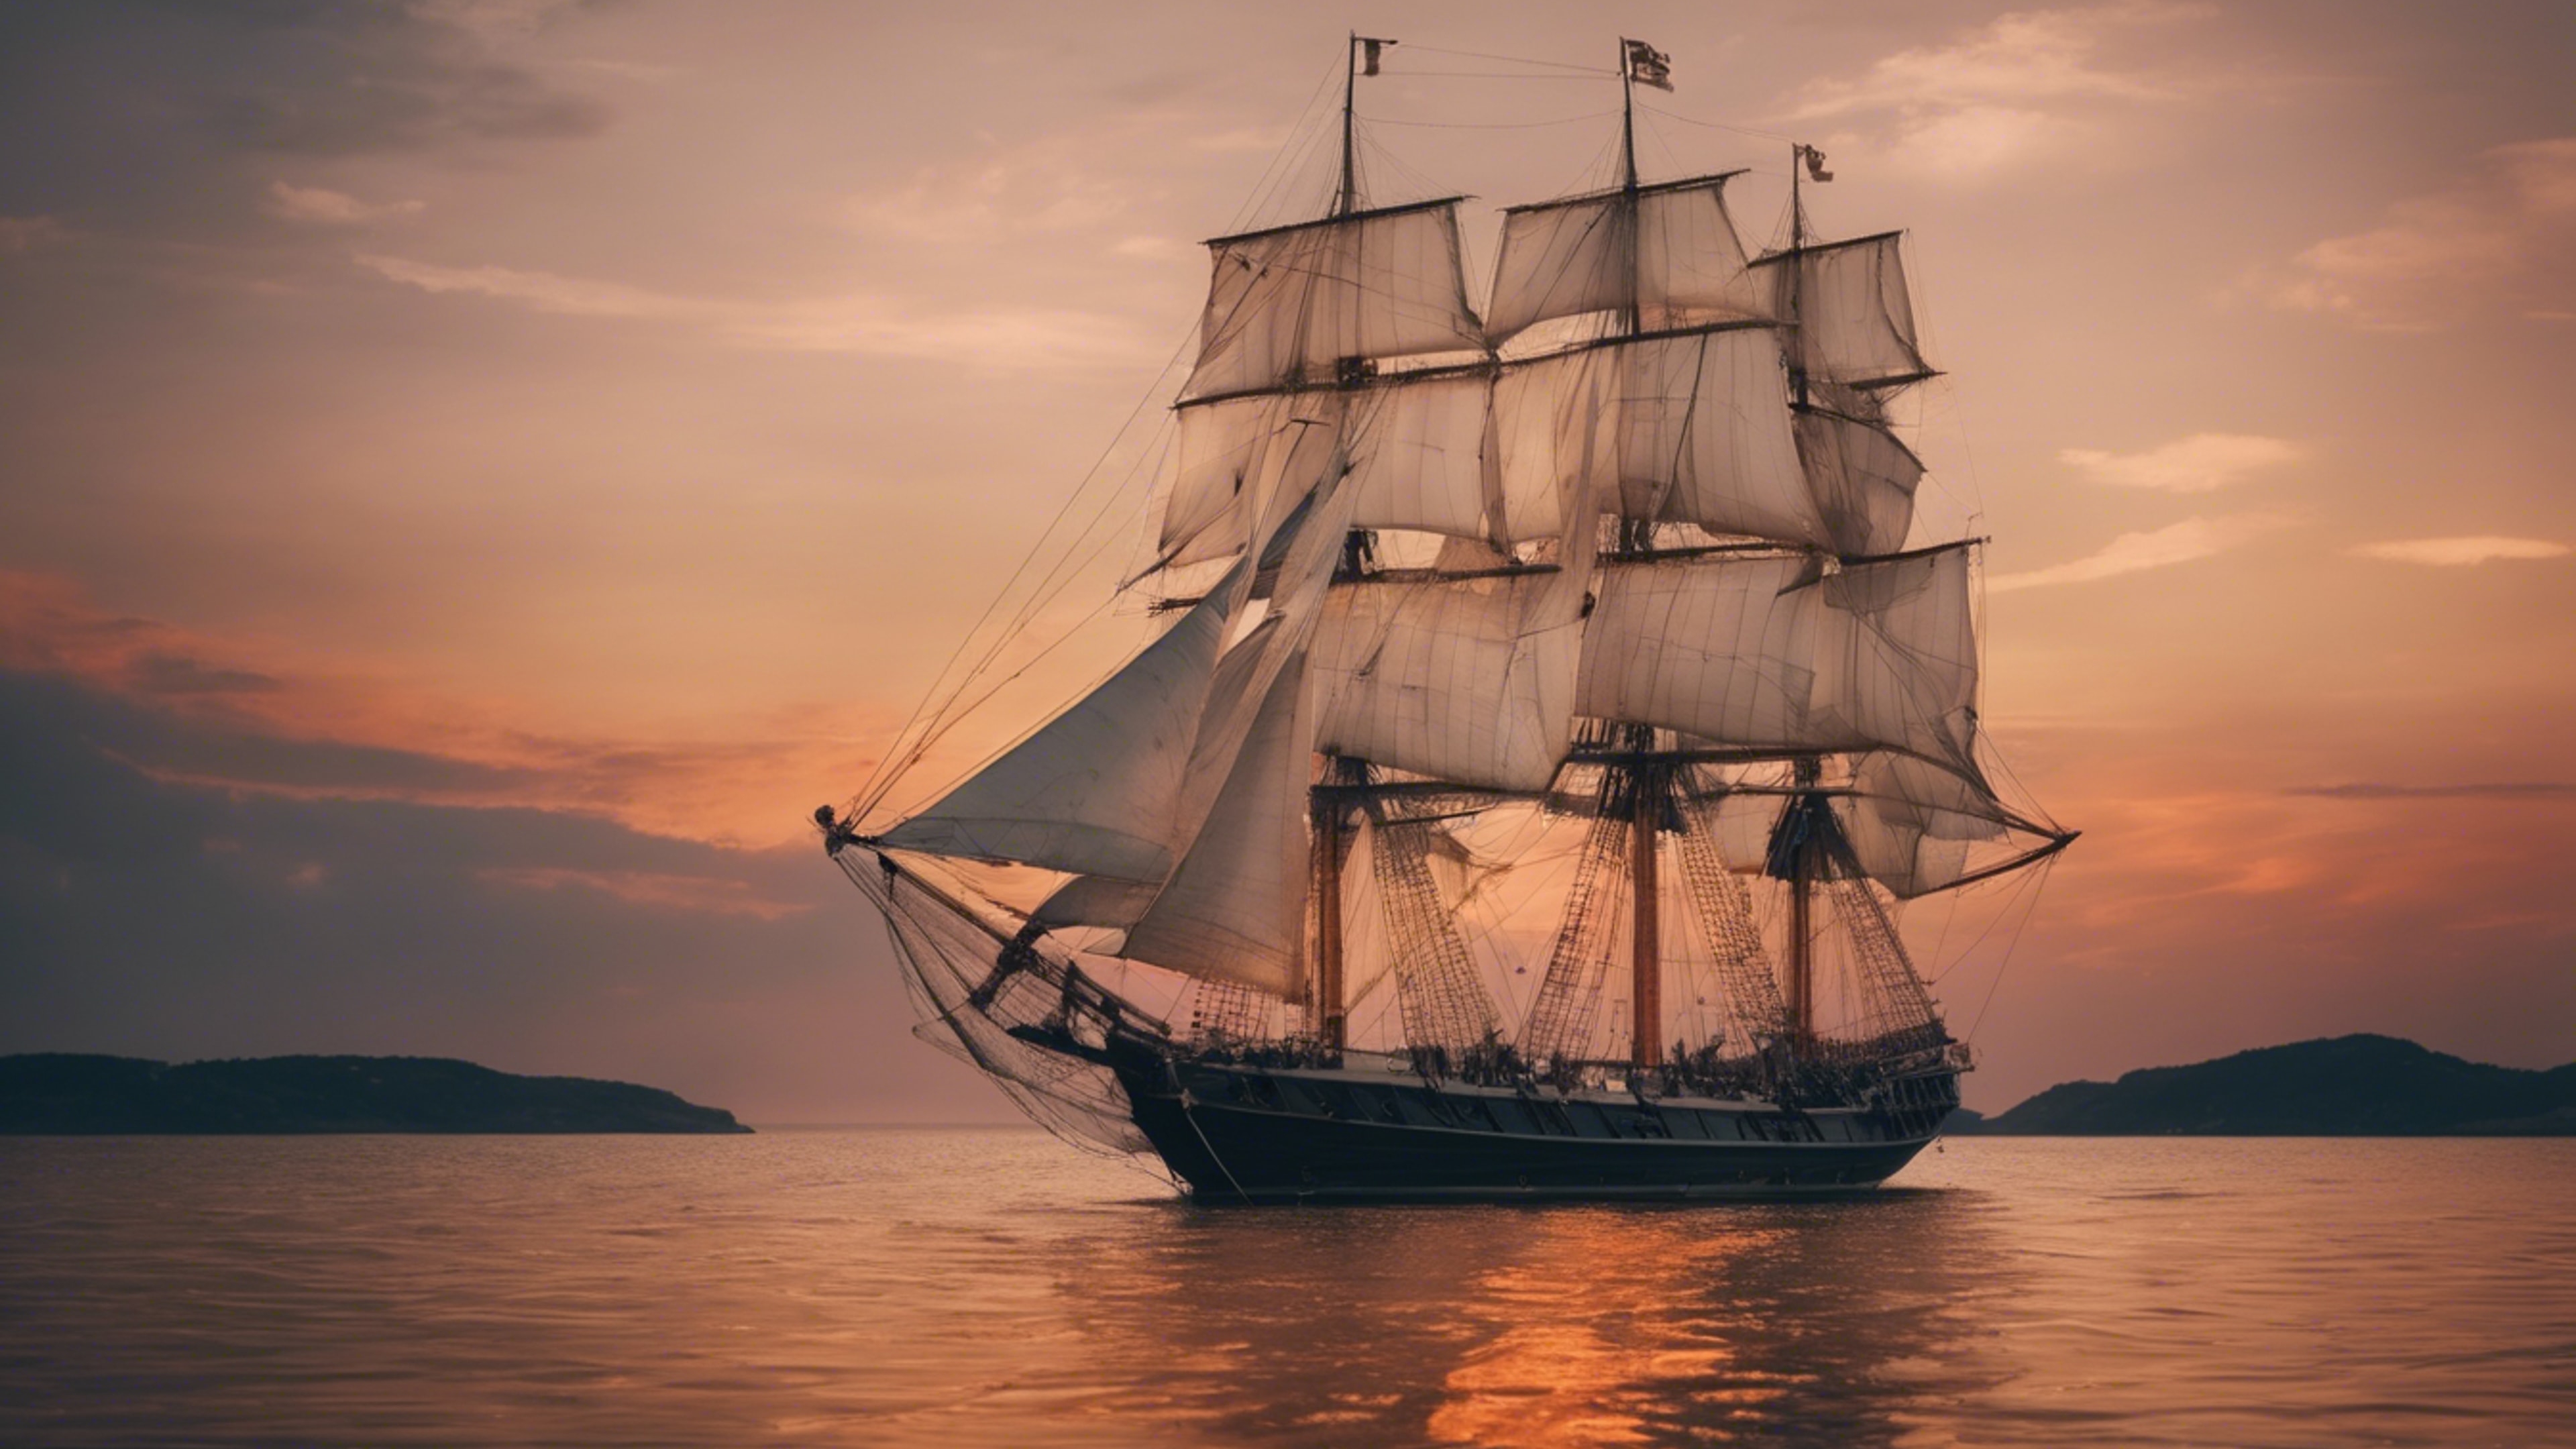 An old style sailing ship, with white sails at full mast, navigating the orange hues of twilight壁紙[249524a422874700a0c9]